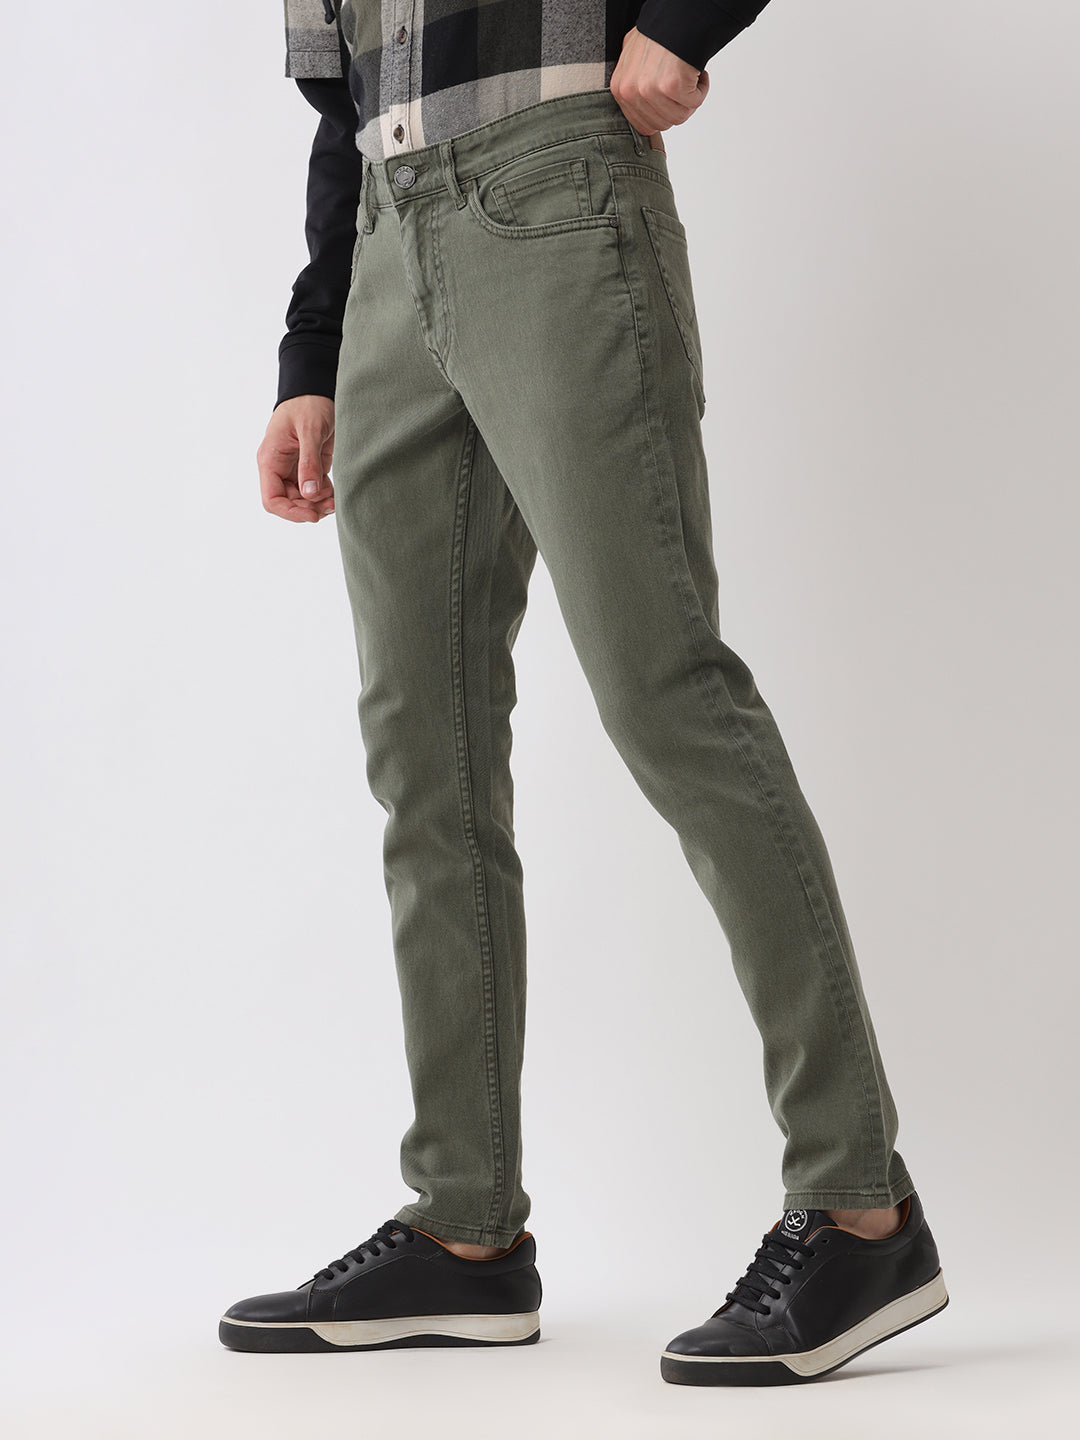 Solid Olive Tapered Jeans